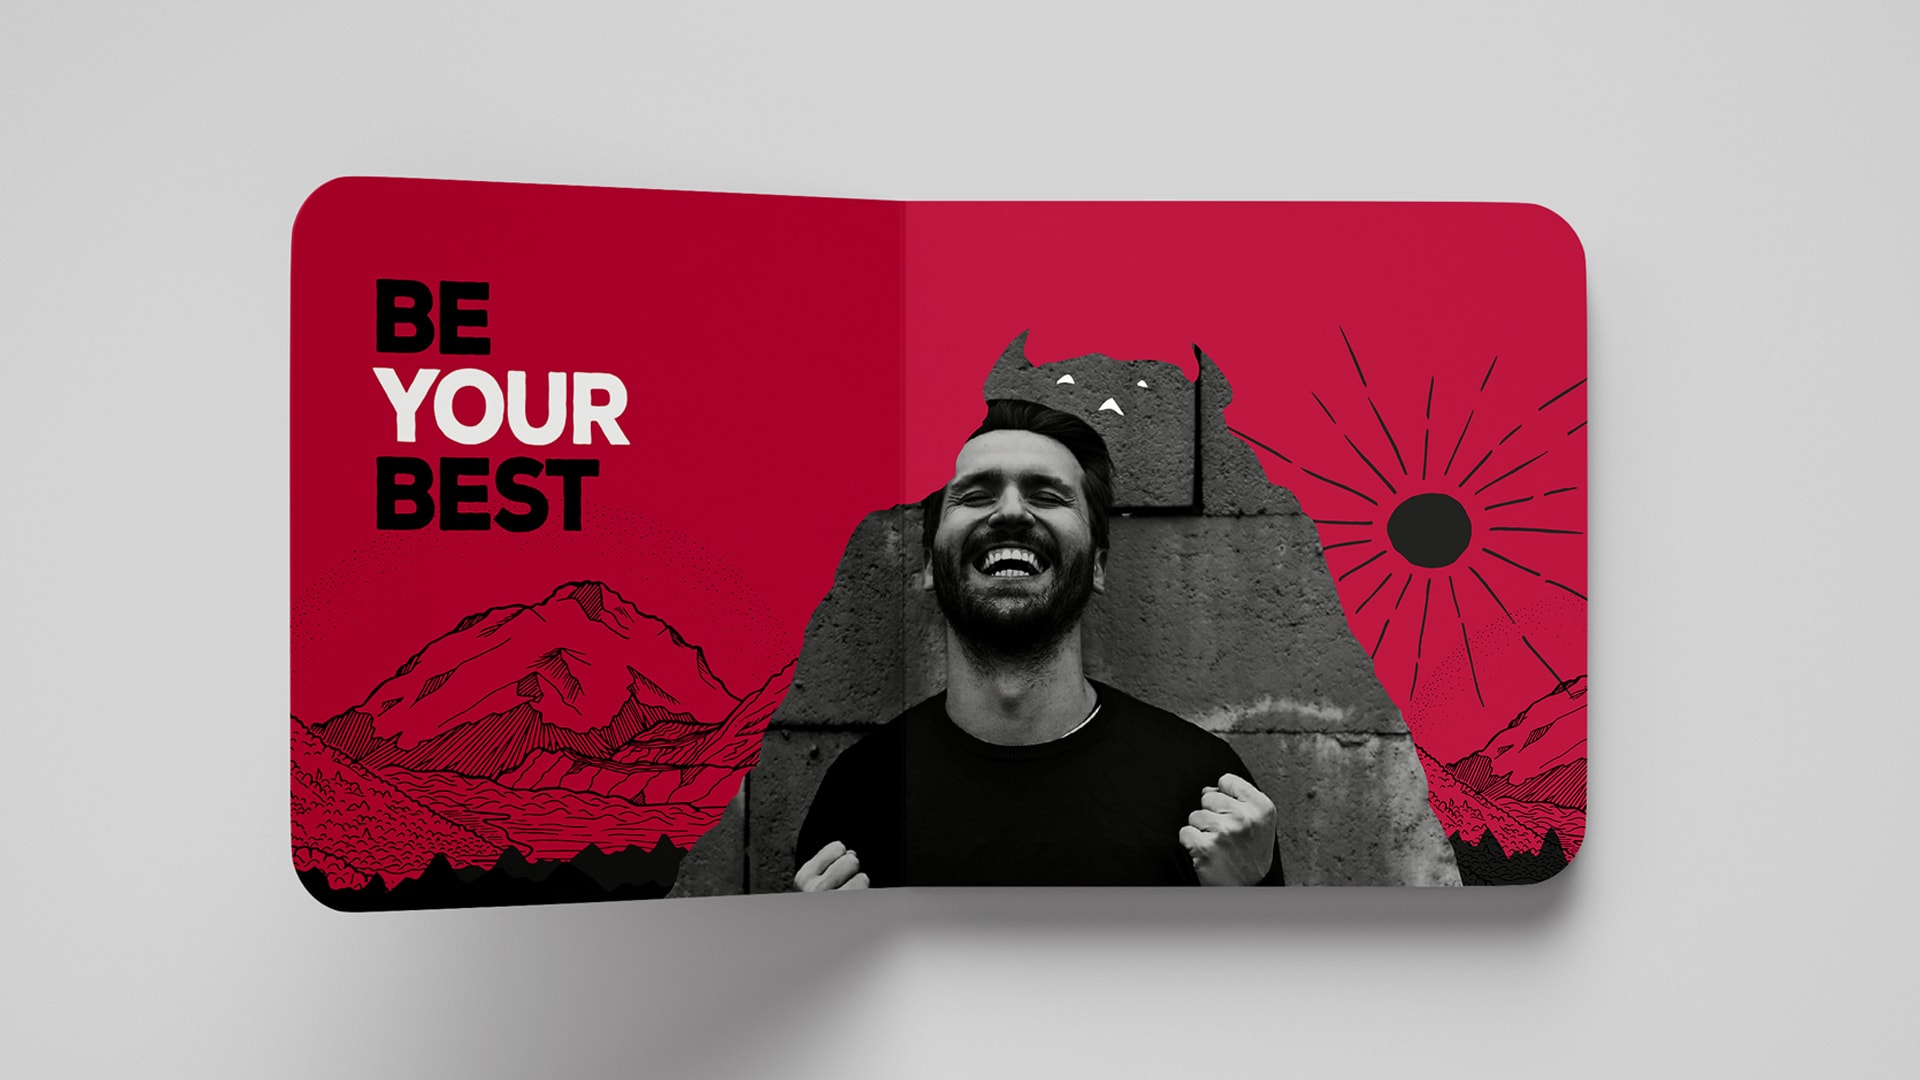 An image of an inside book cover design displaying the Beast branding consisting of and illustration of beast like creature that looks like a black mountain. Overlaying the beast is the photo of a man who looks as though he is celebrating an achievement. The words 'Be your best' are displayed